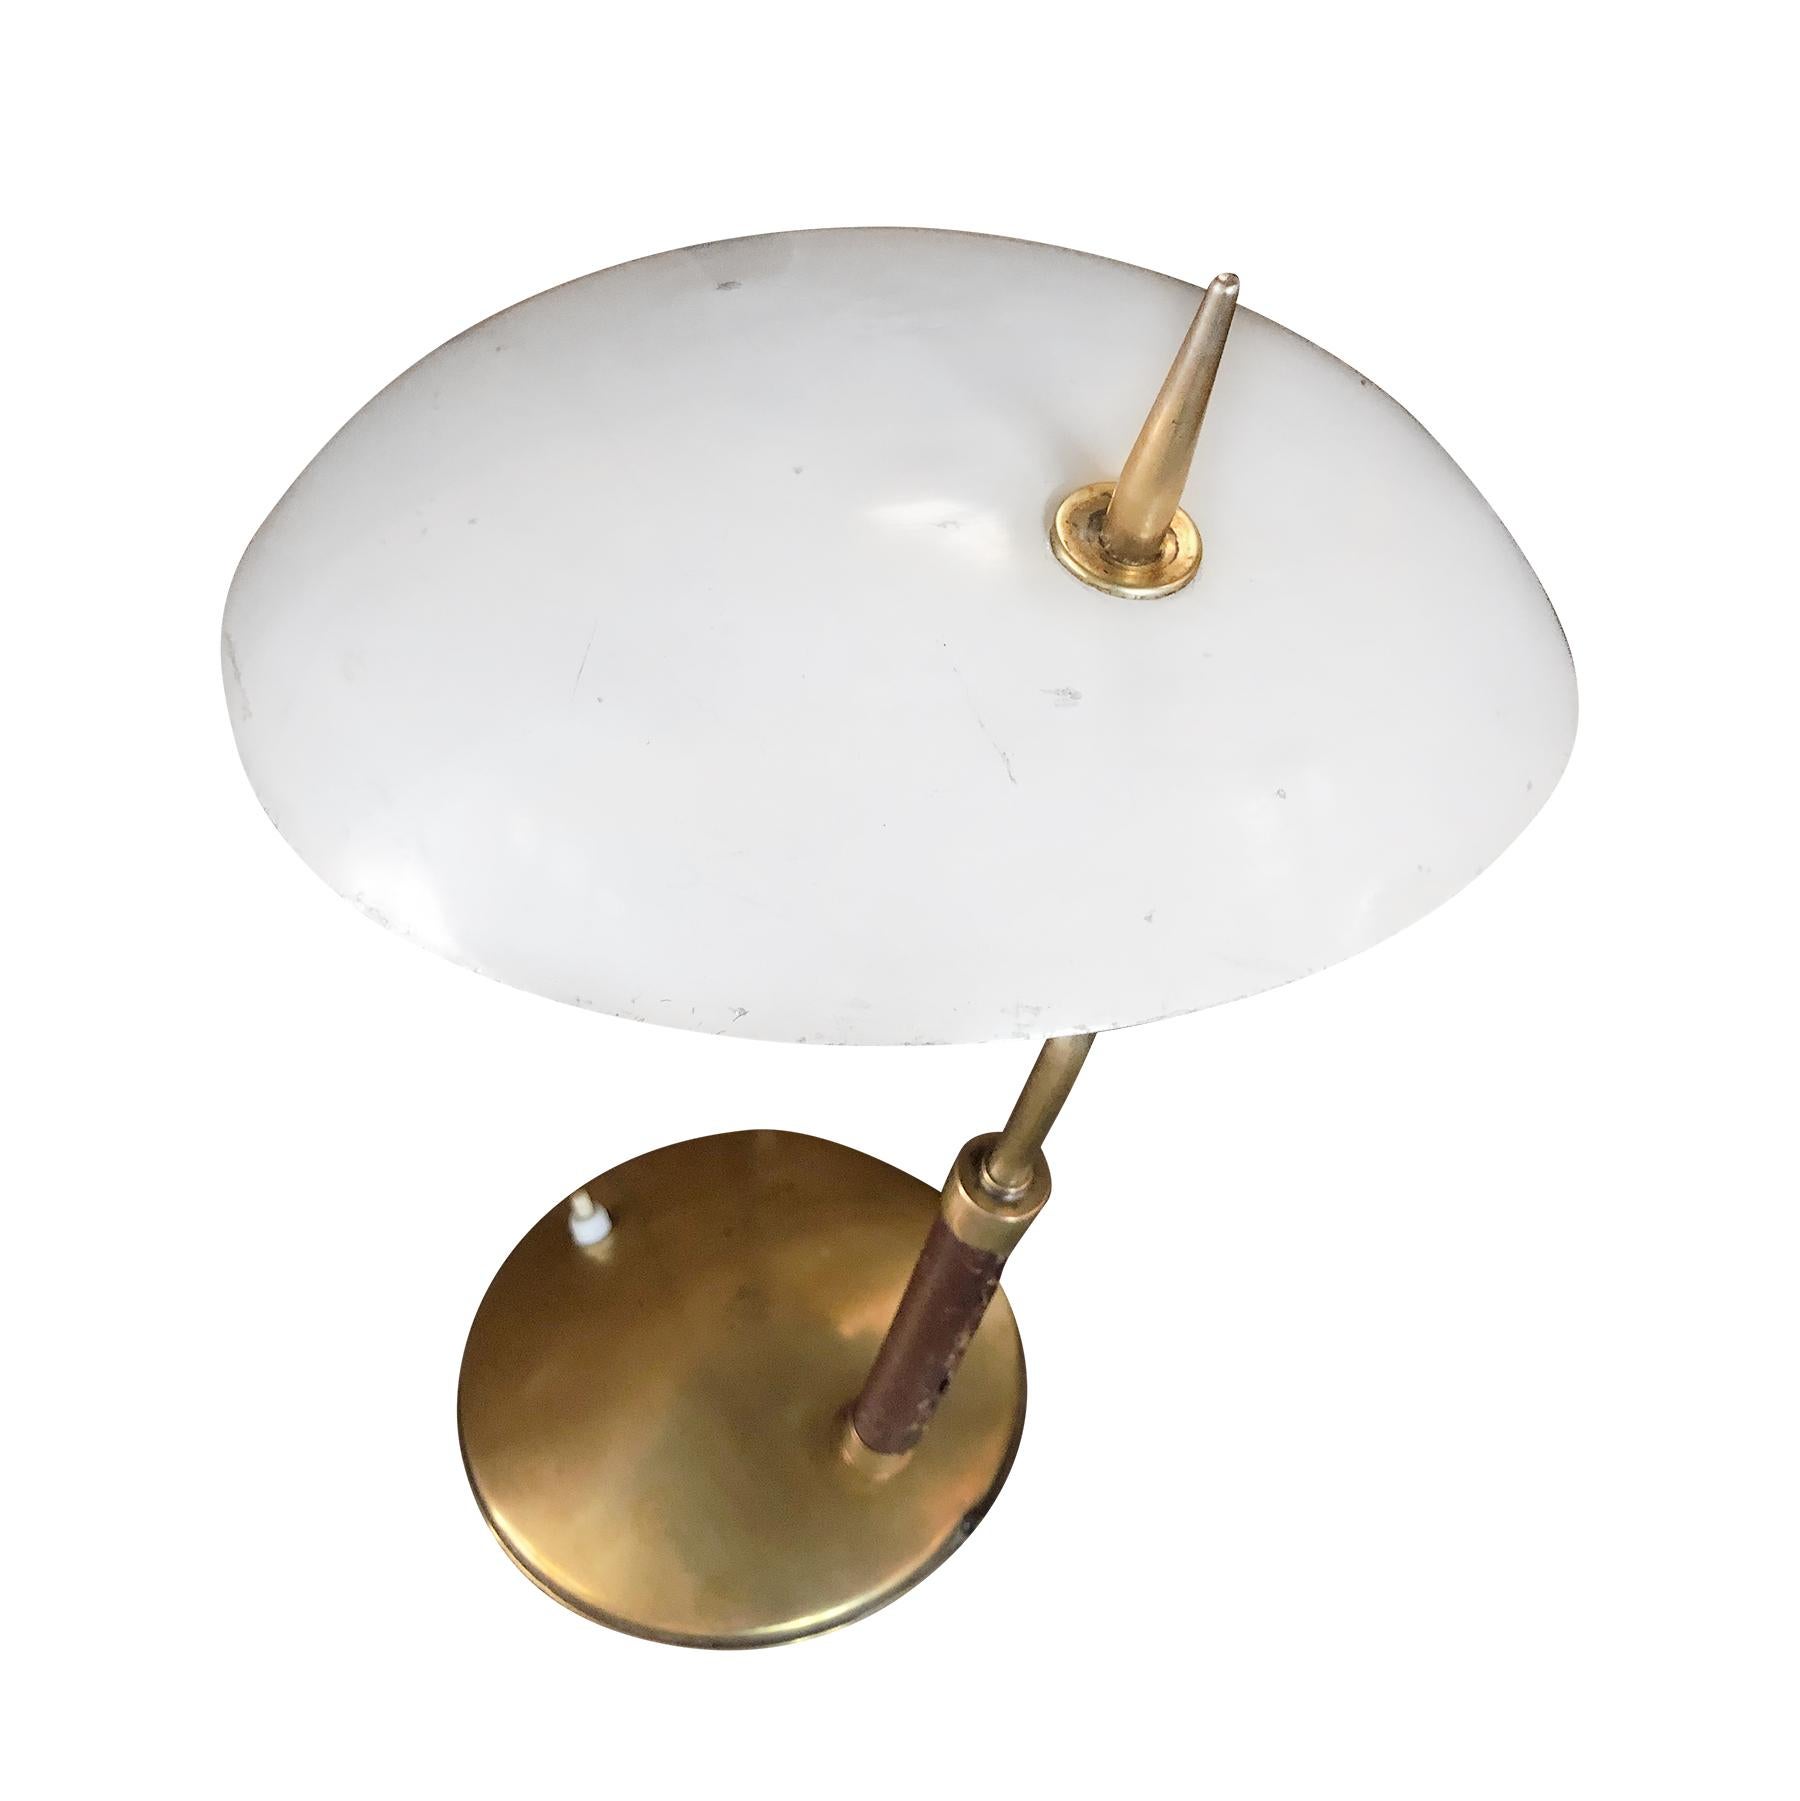 A vintage Mid-Century Modern Italian small desk lamp or table lamp made of lacquered metal and brass with a white adjustable oval lamp shade, featuring a one light socket. Produced by Stilnovo in good condition. The lamp neck is covered in dark